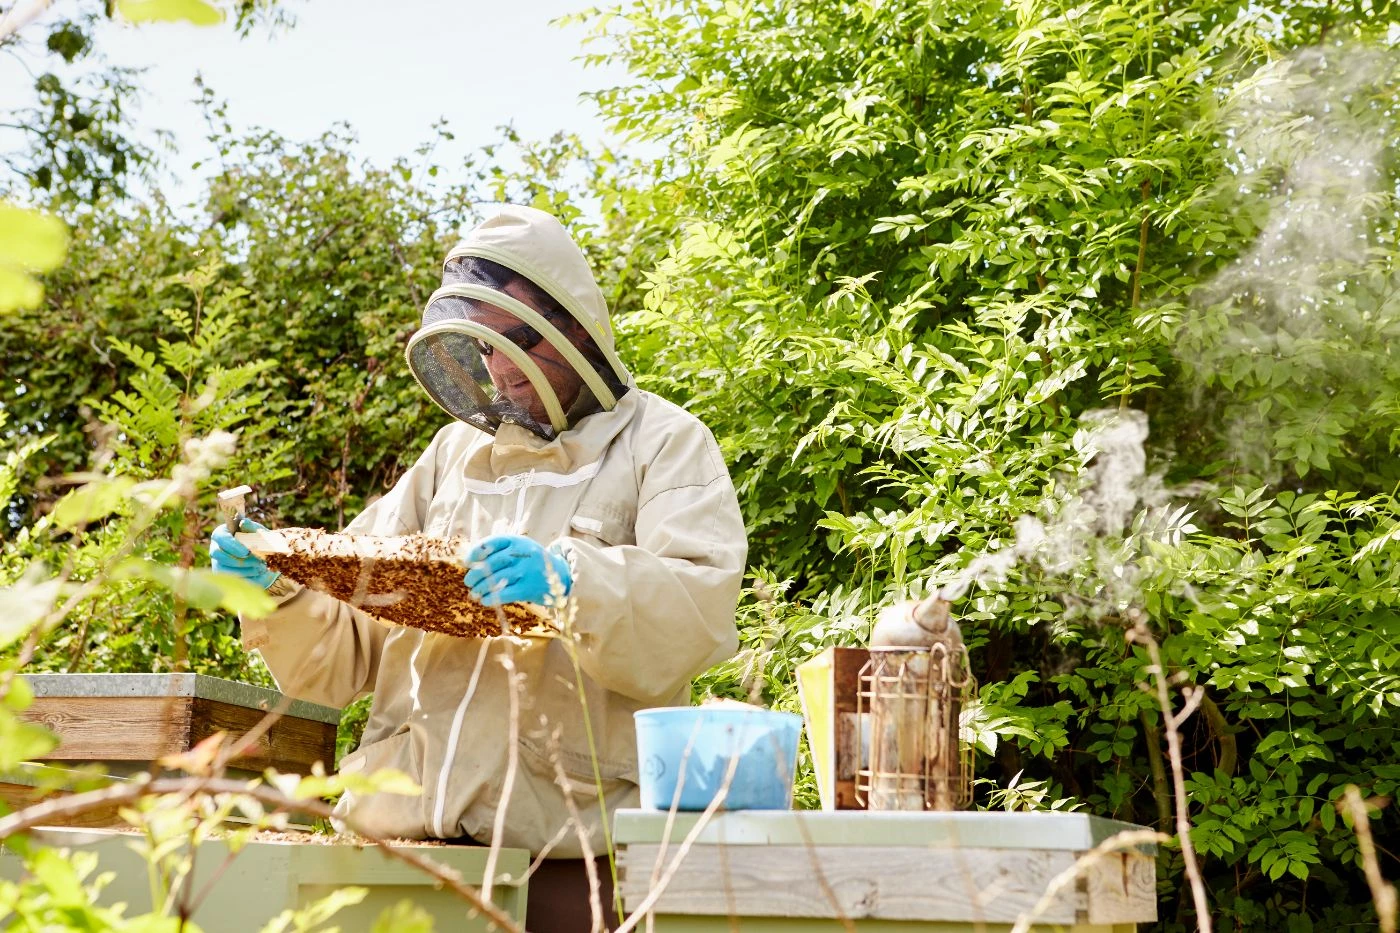 How to Get Honey From a Beehive Without Getting Stung - 🐝 BootstrapBee ...